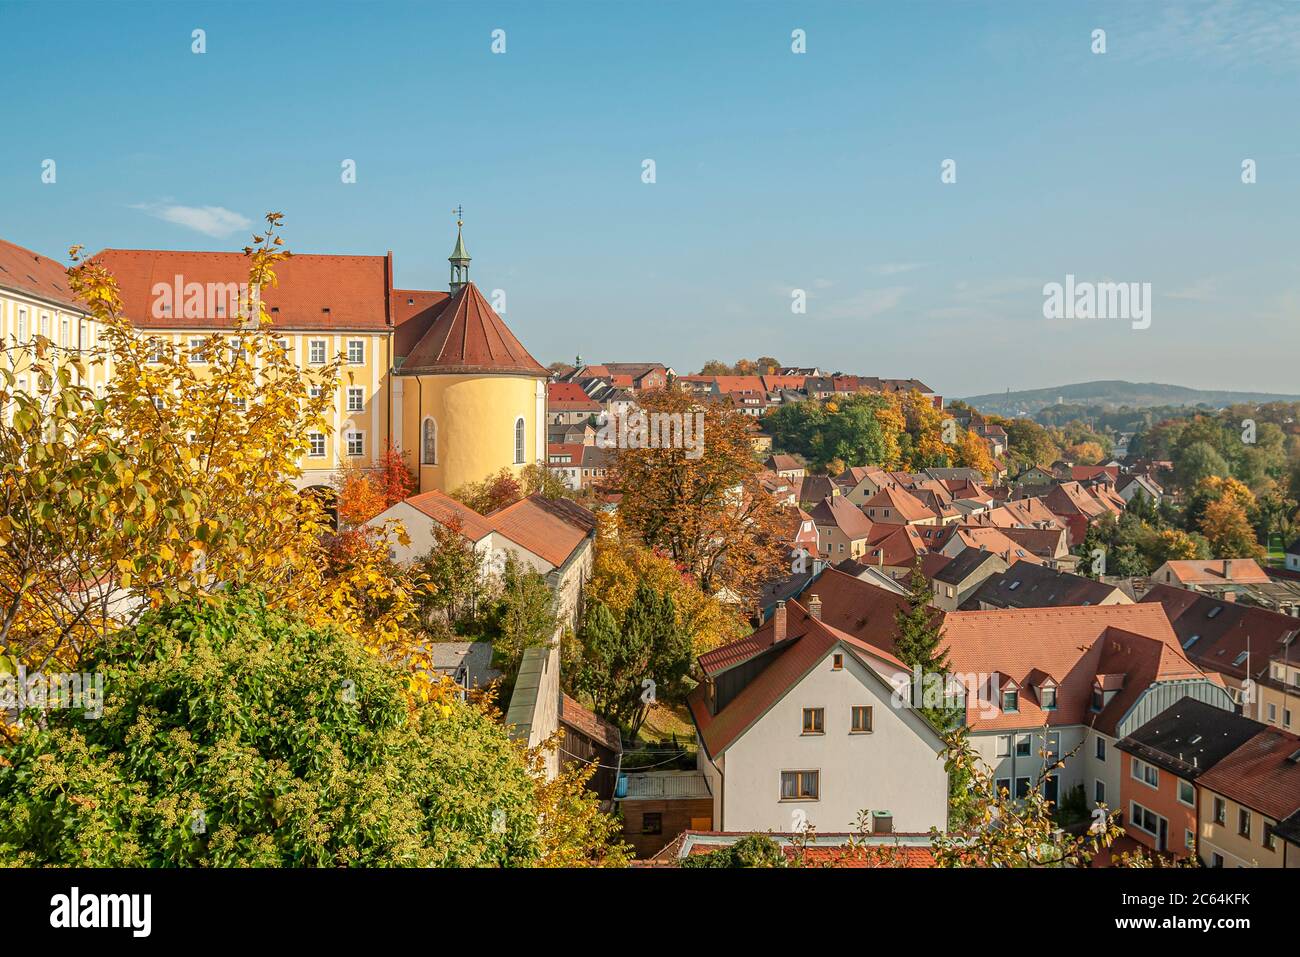 View from the castle over the historic town of Sulzbach-Rosenberg in Bavaria, Germany Stock Photo